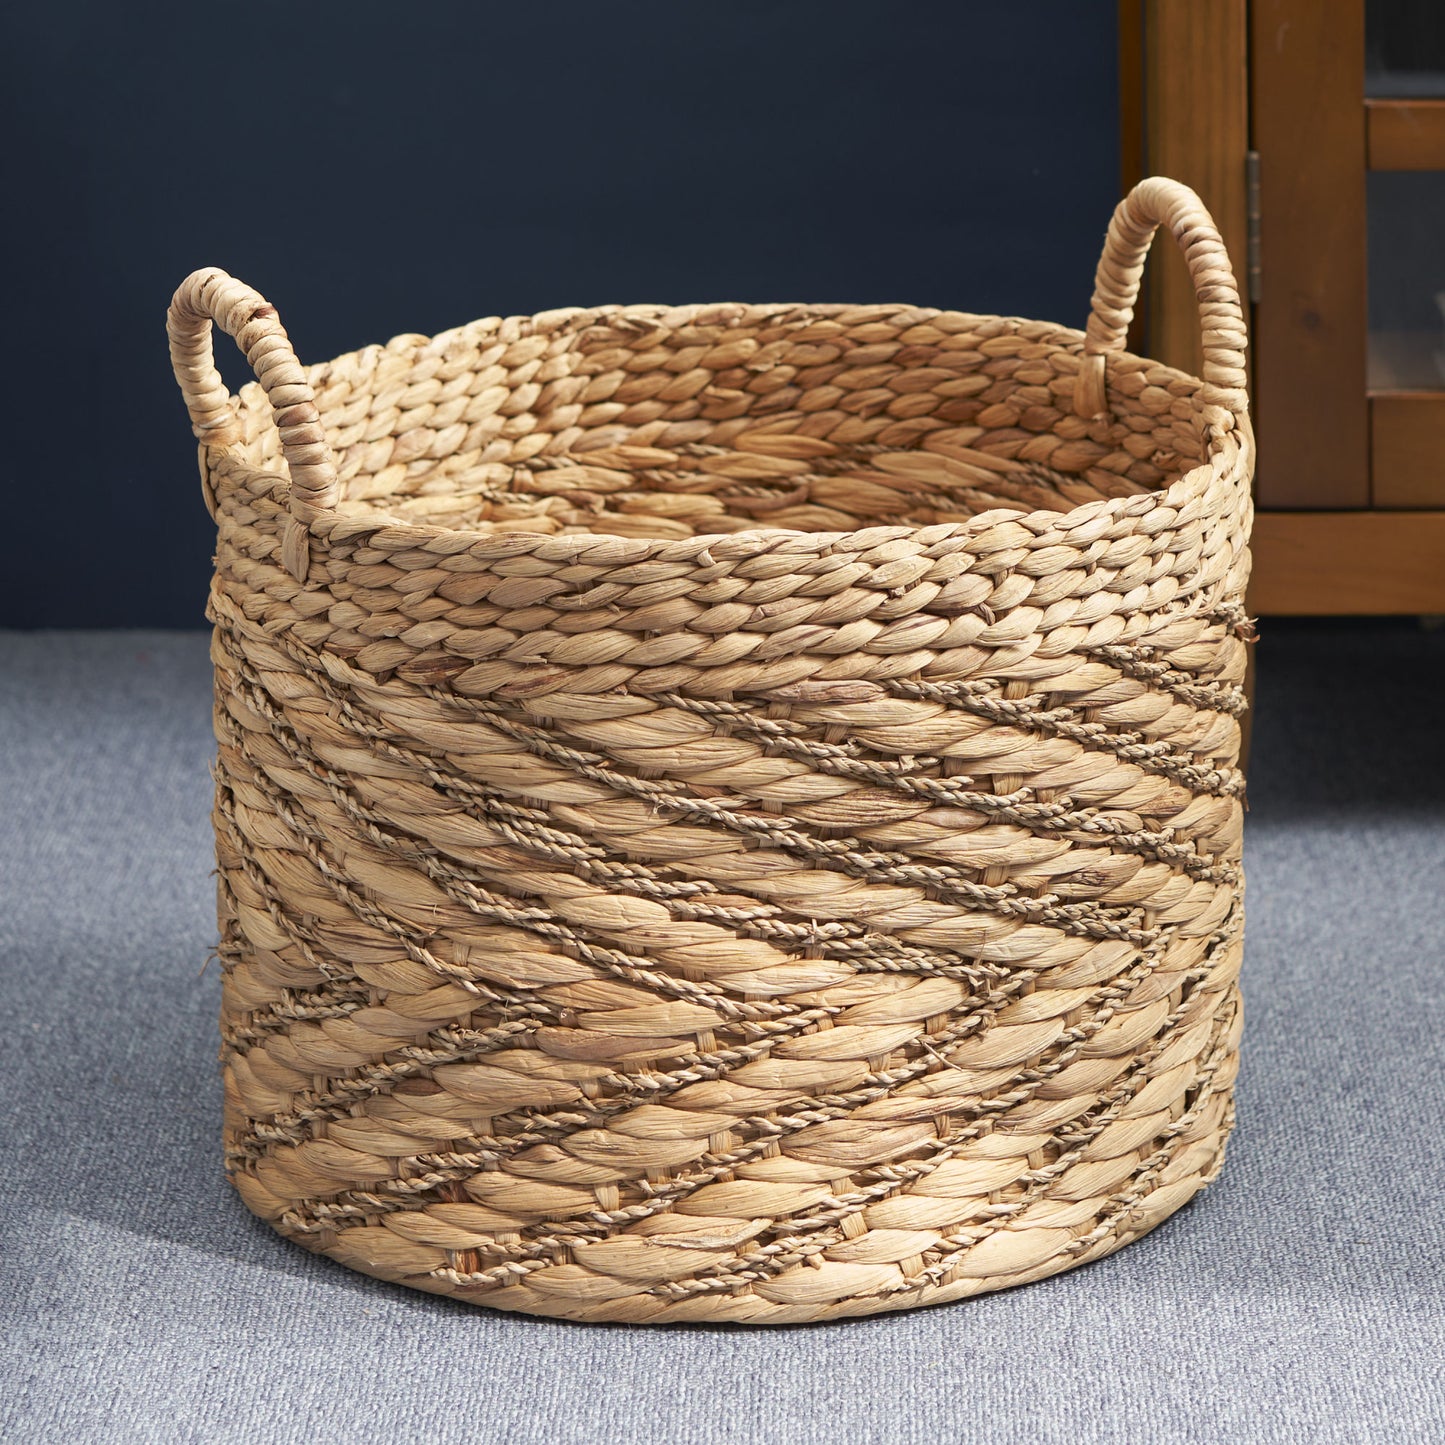 Isador Seagrass Basket with Handles - 15" x 15" x 15"